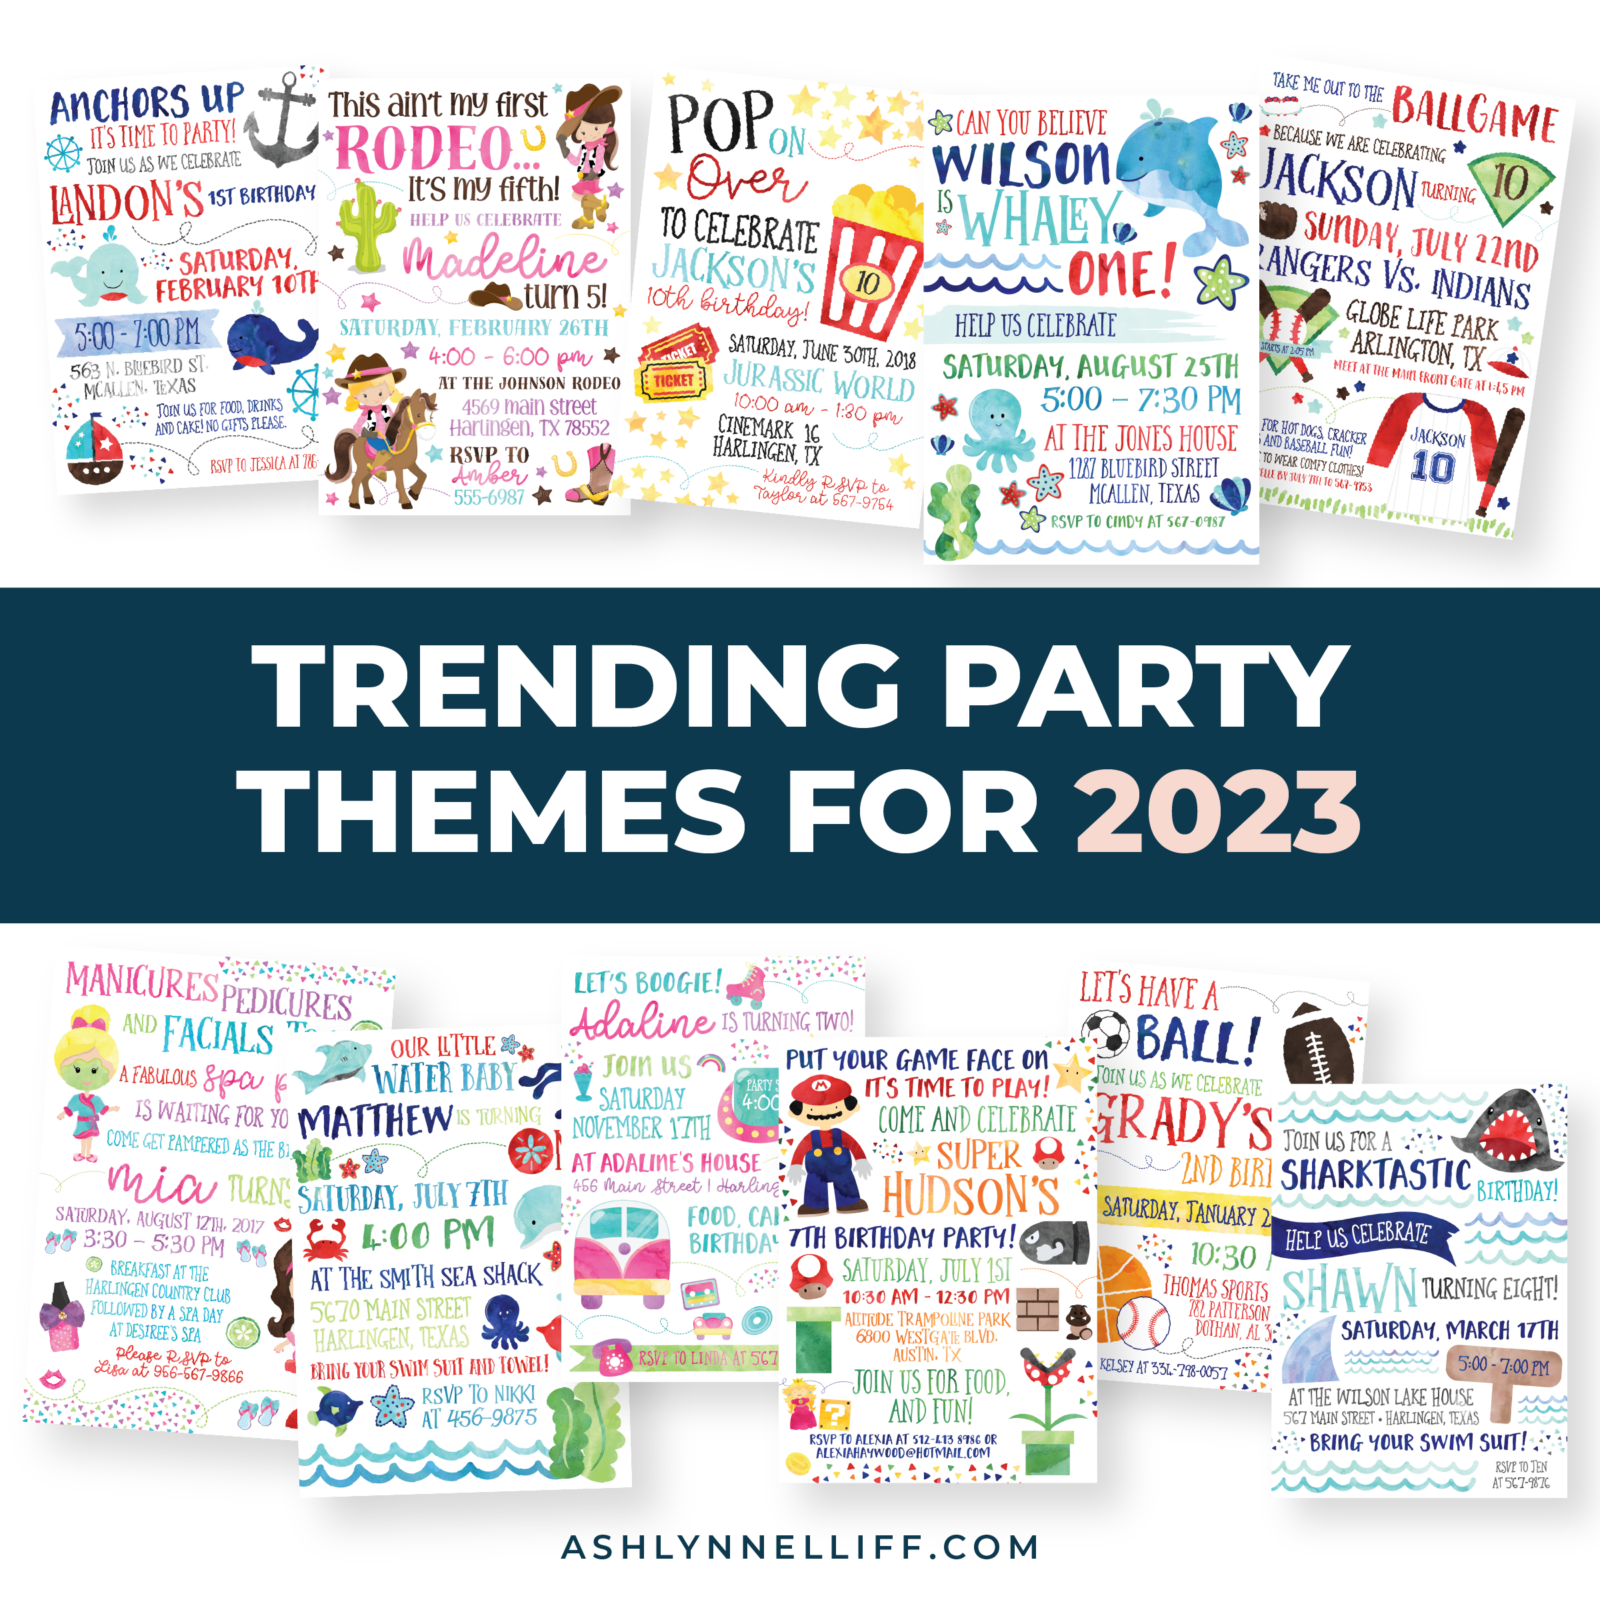 Trending Party Themes for 2023